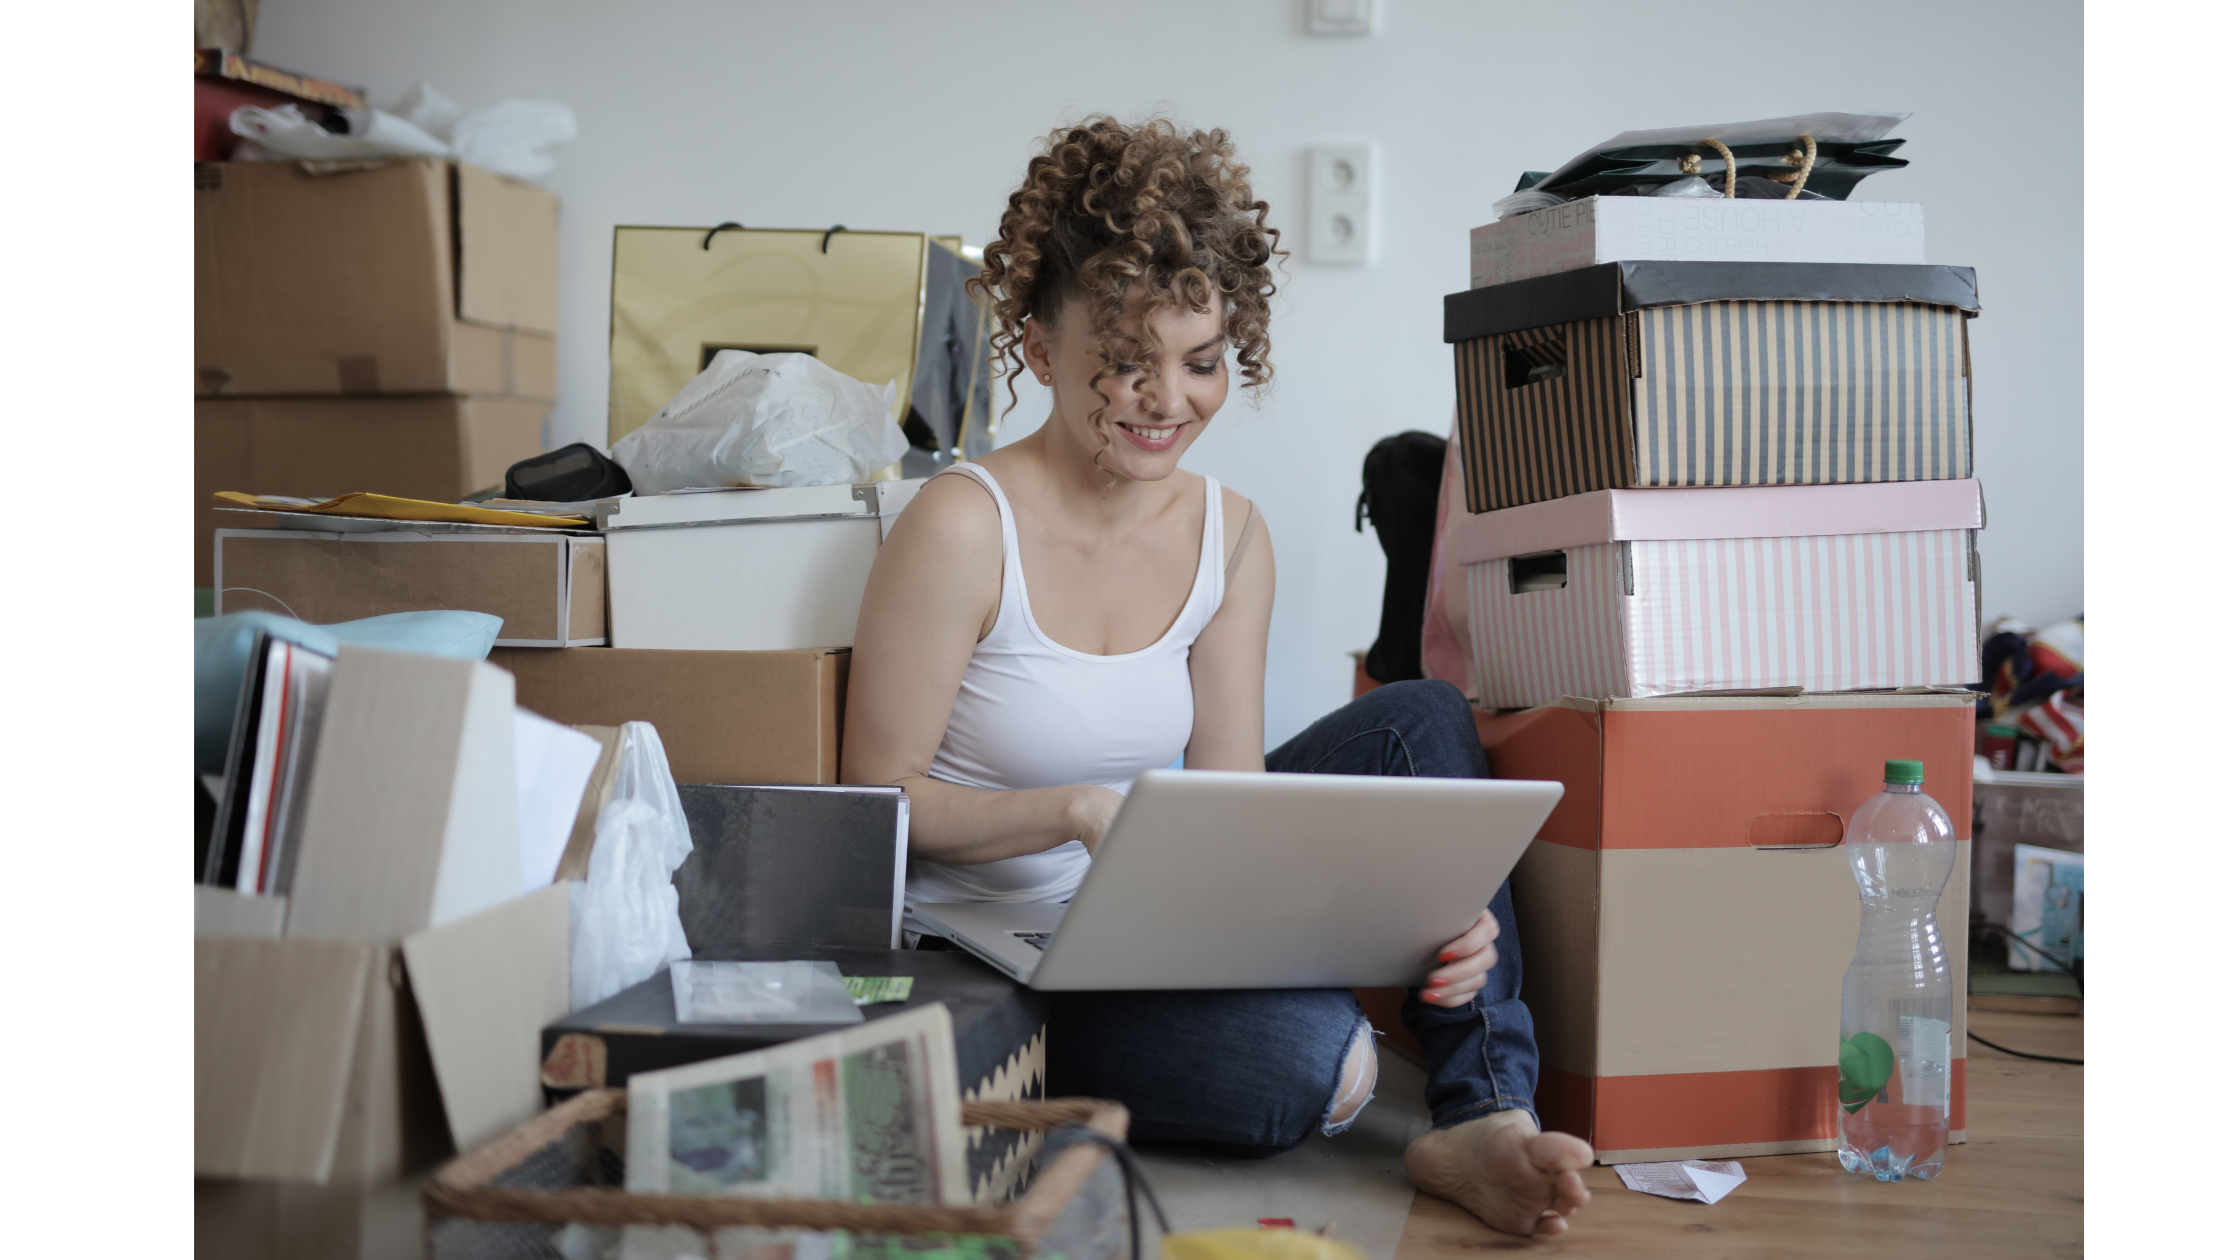 What Is Disorganization? - woman in room full of stuff